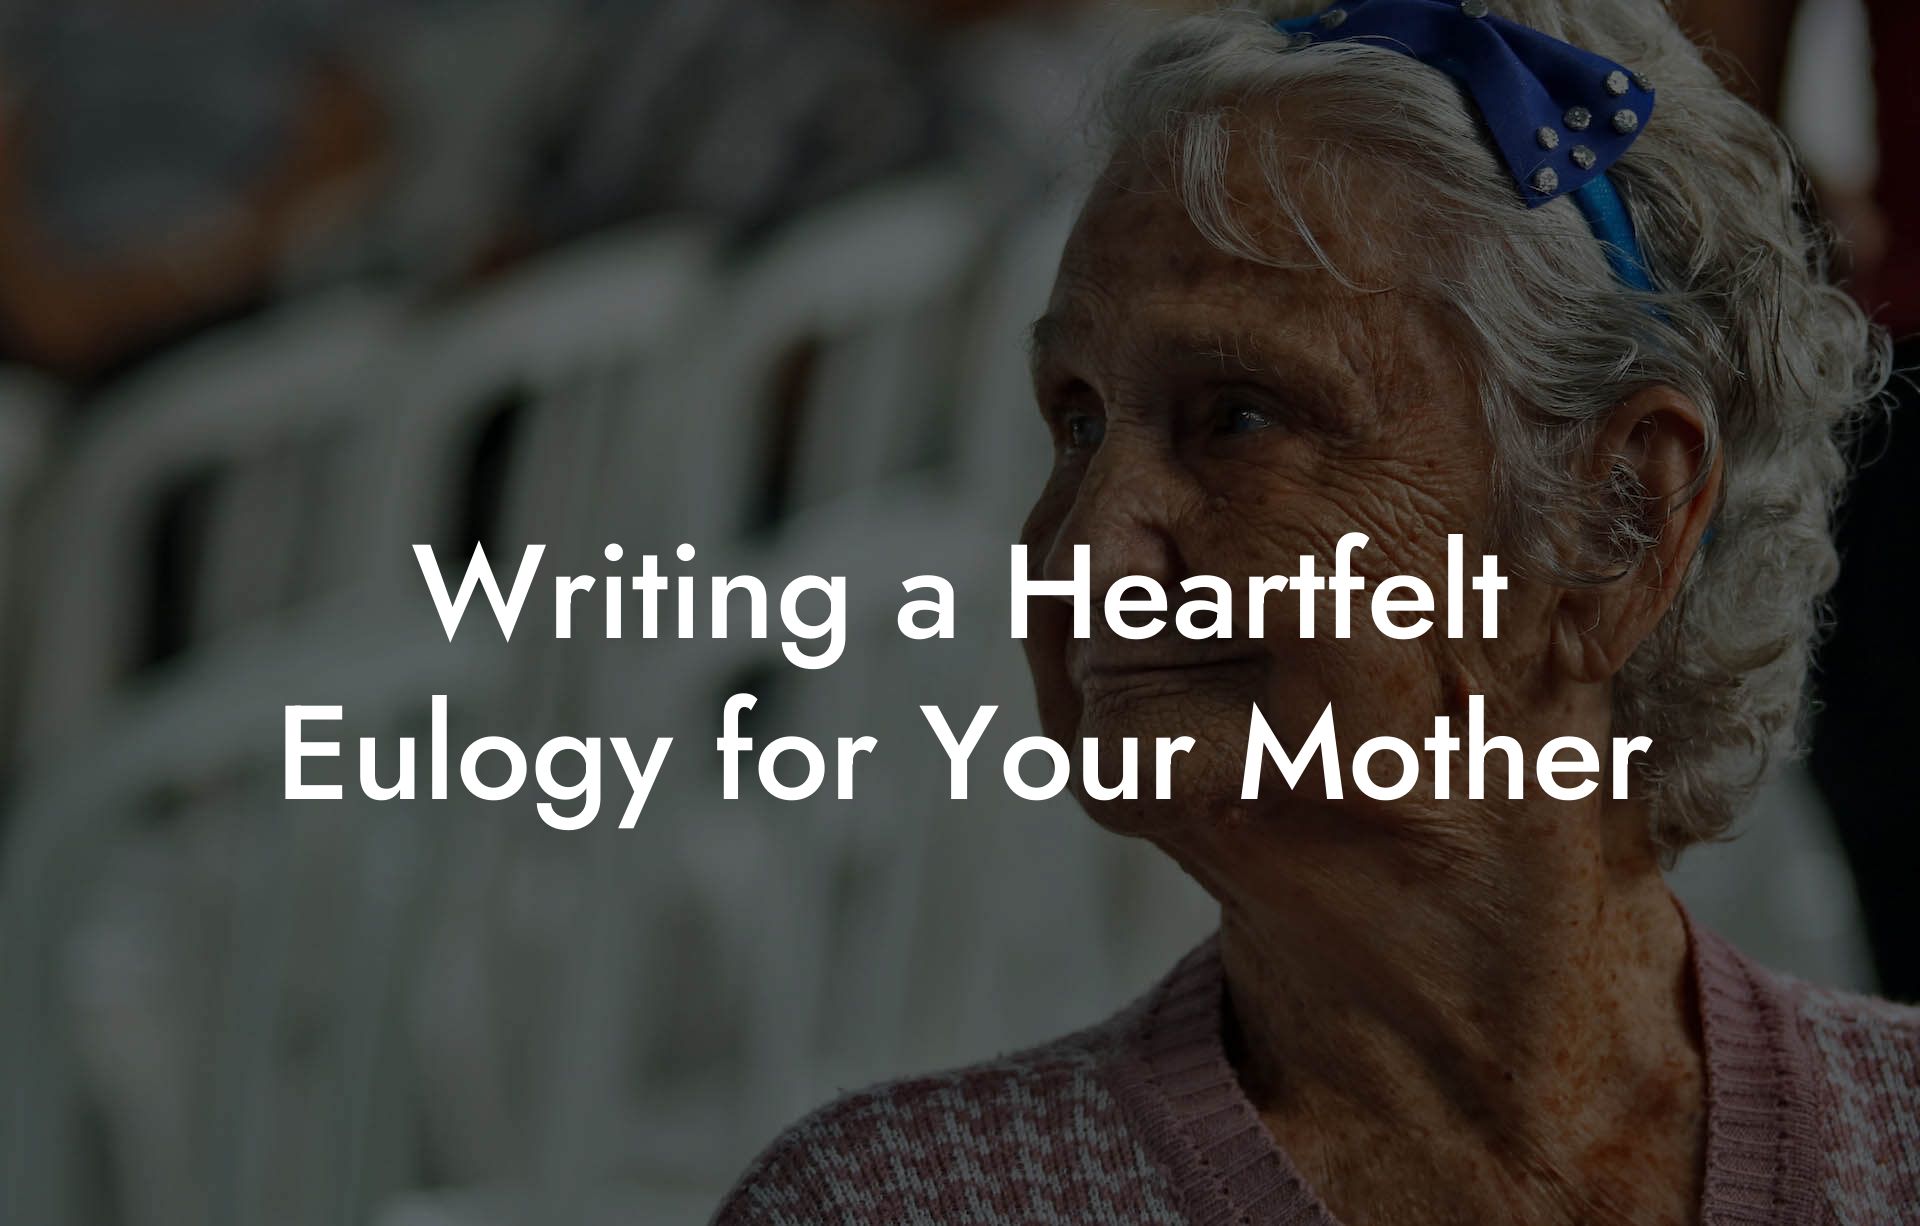 Writing a Heartfelt Eulogy for Your Mother